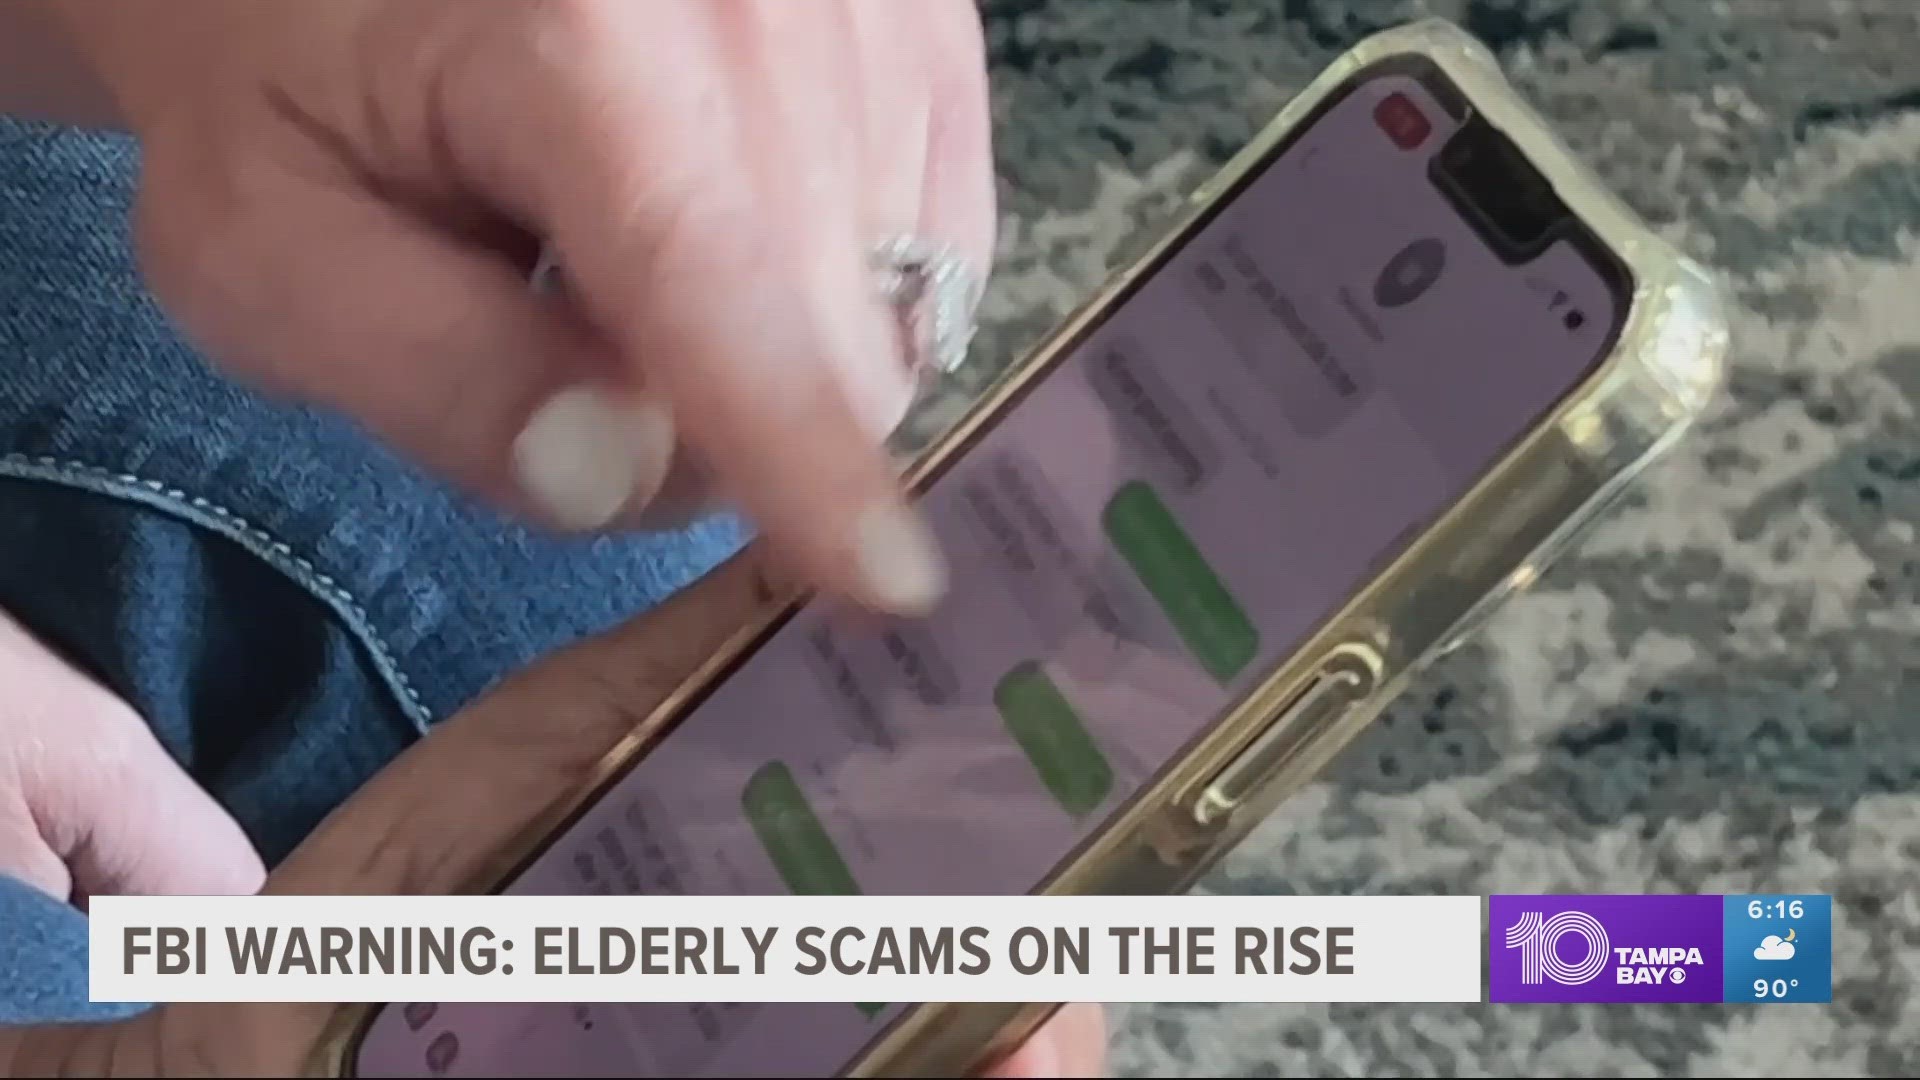 The reports from the year 2022 show the number of scams against the elderly is skyrocketing. Losses were up 84% over 2021.